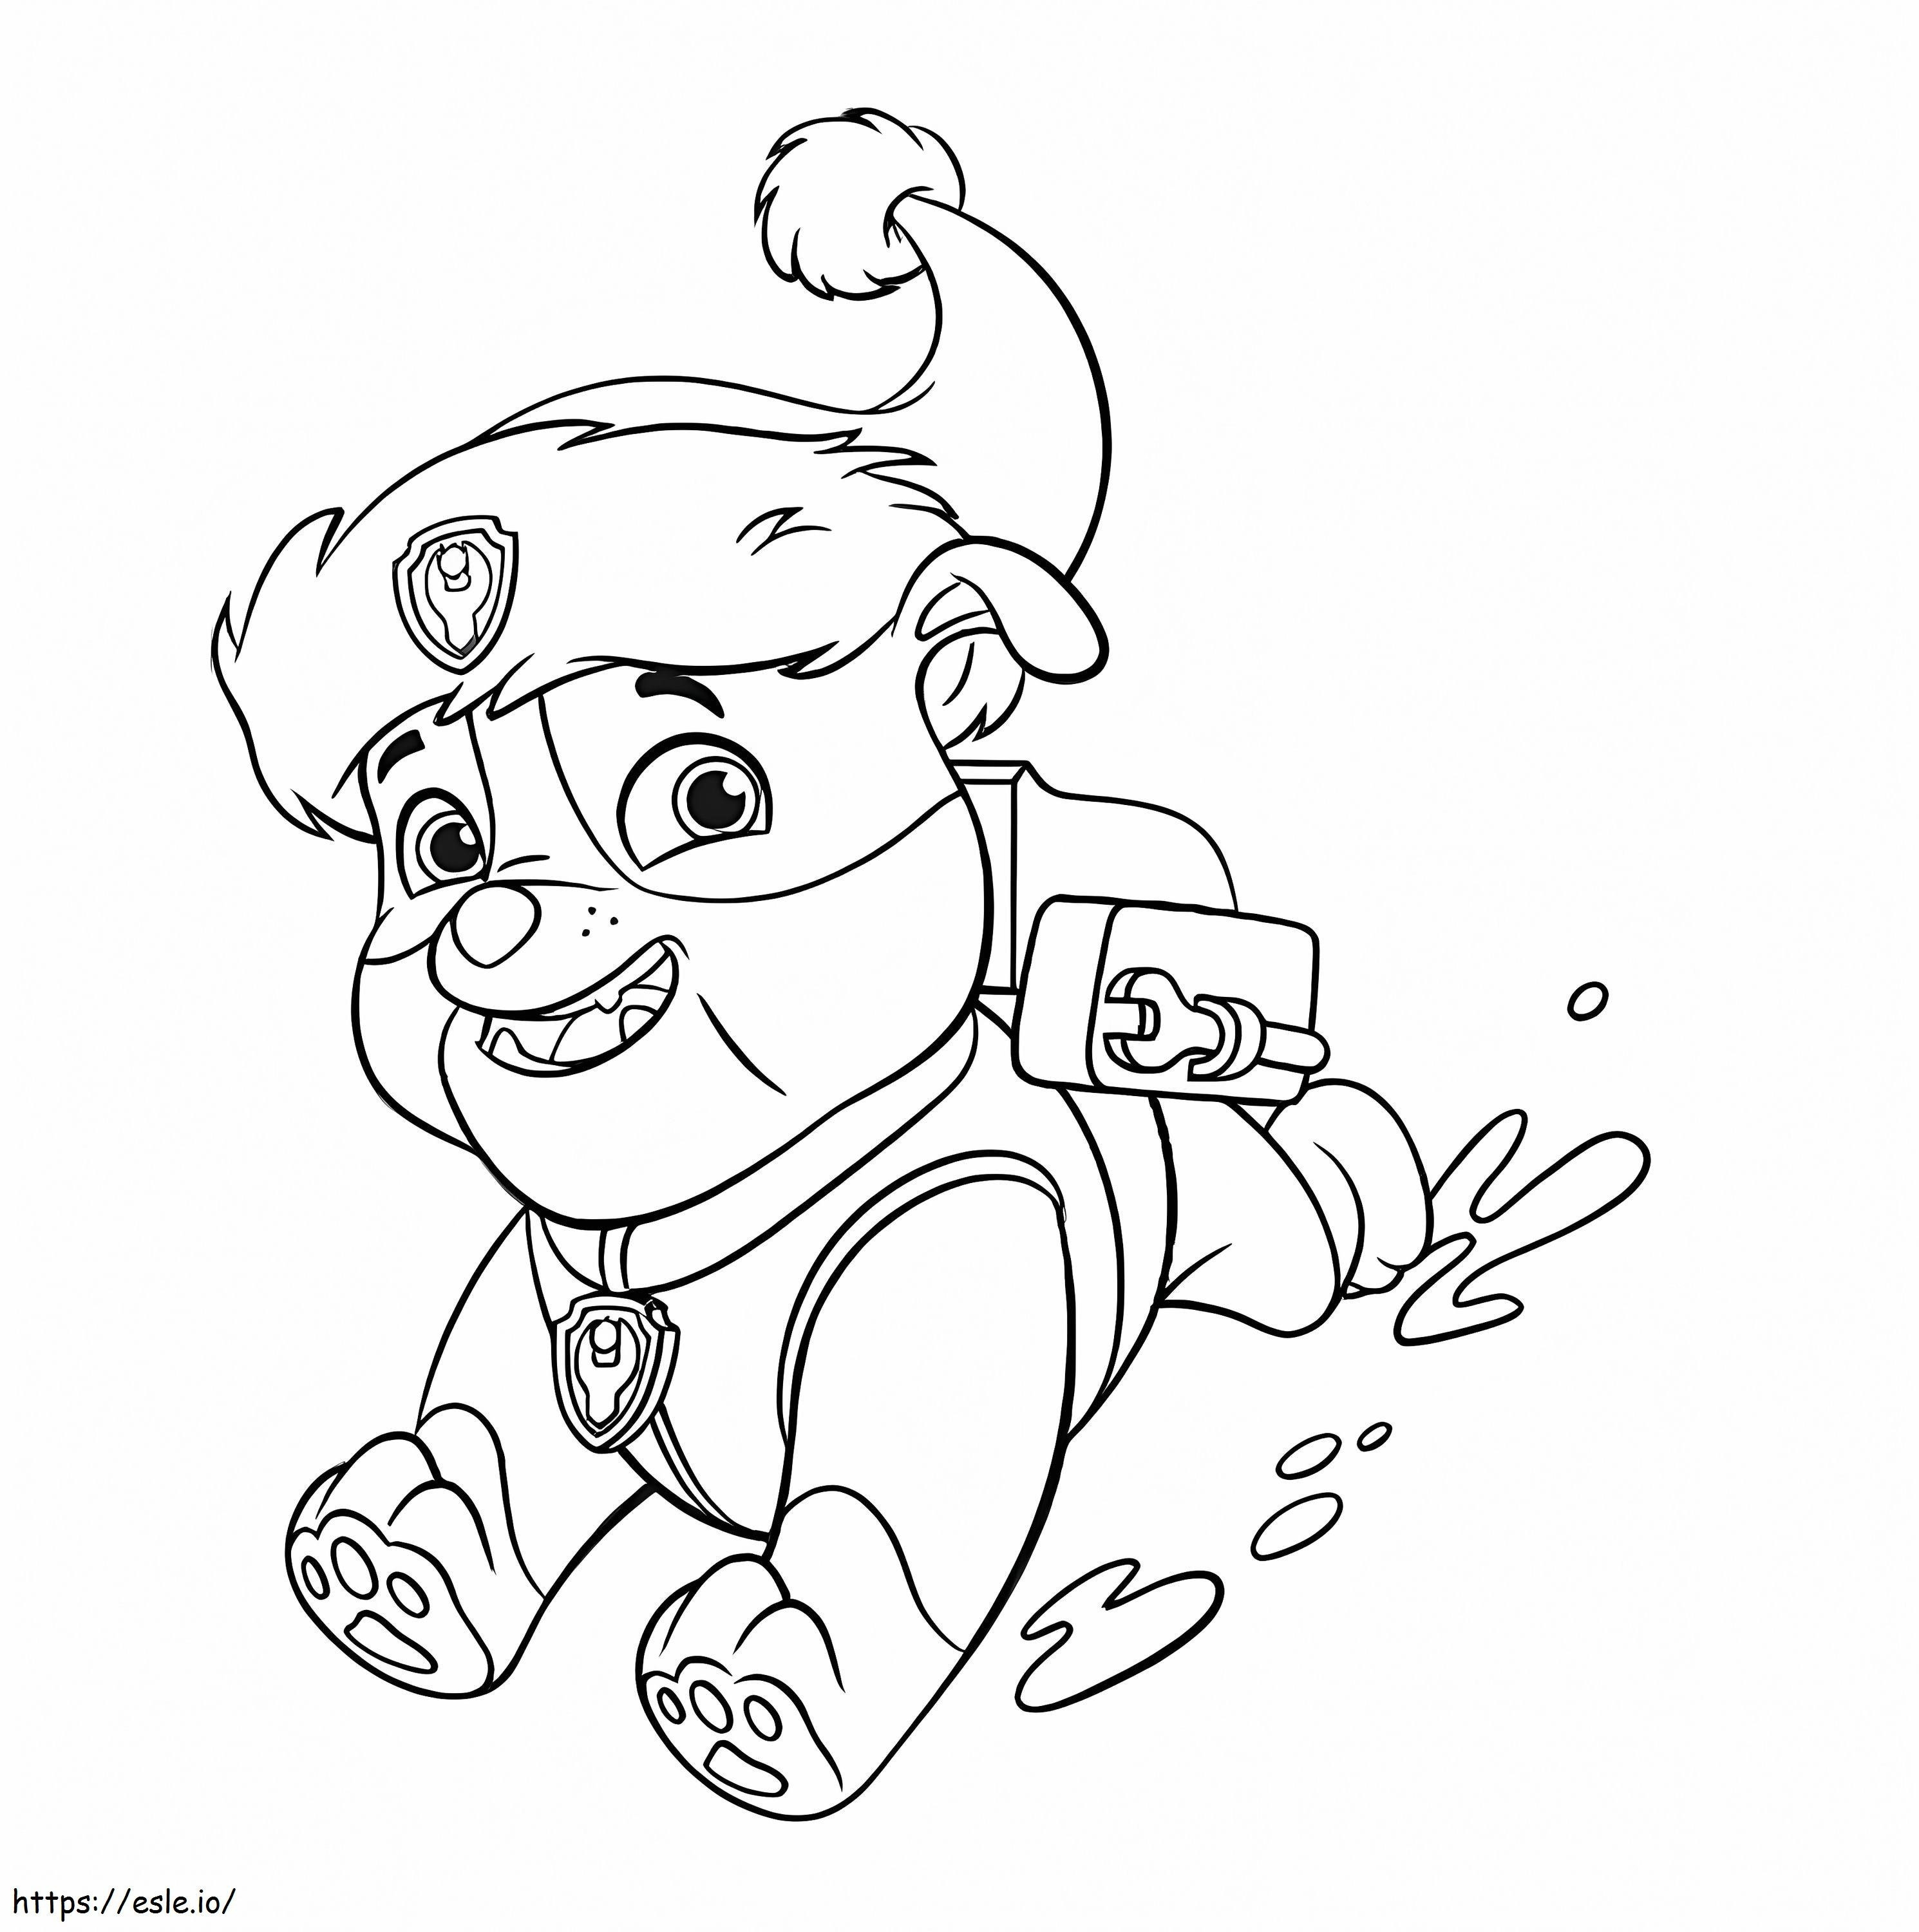 Rubble 2 coloring page